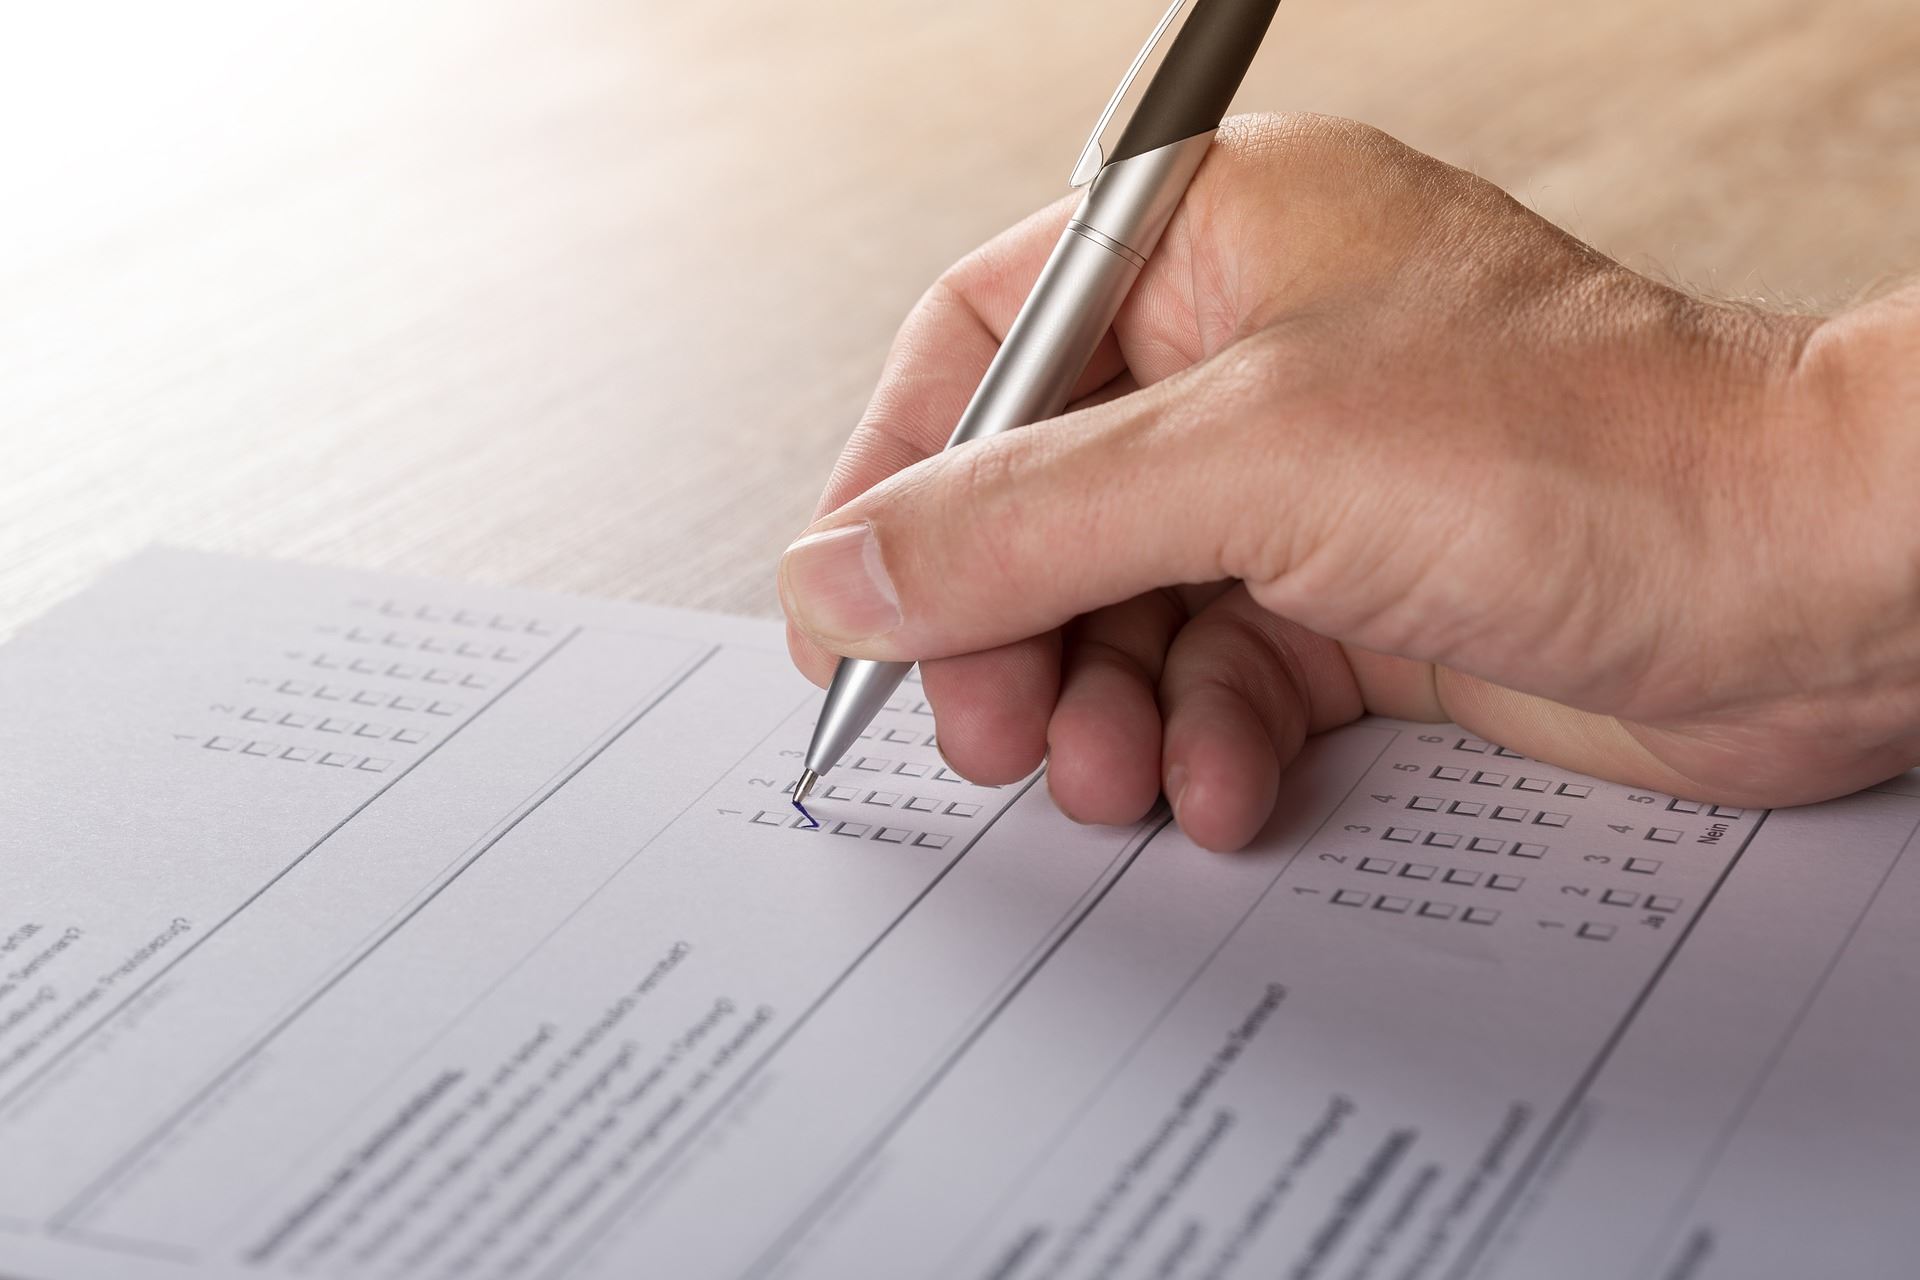 Person filling out survey with pen and paper